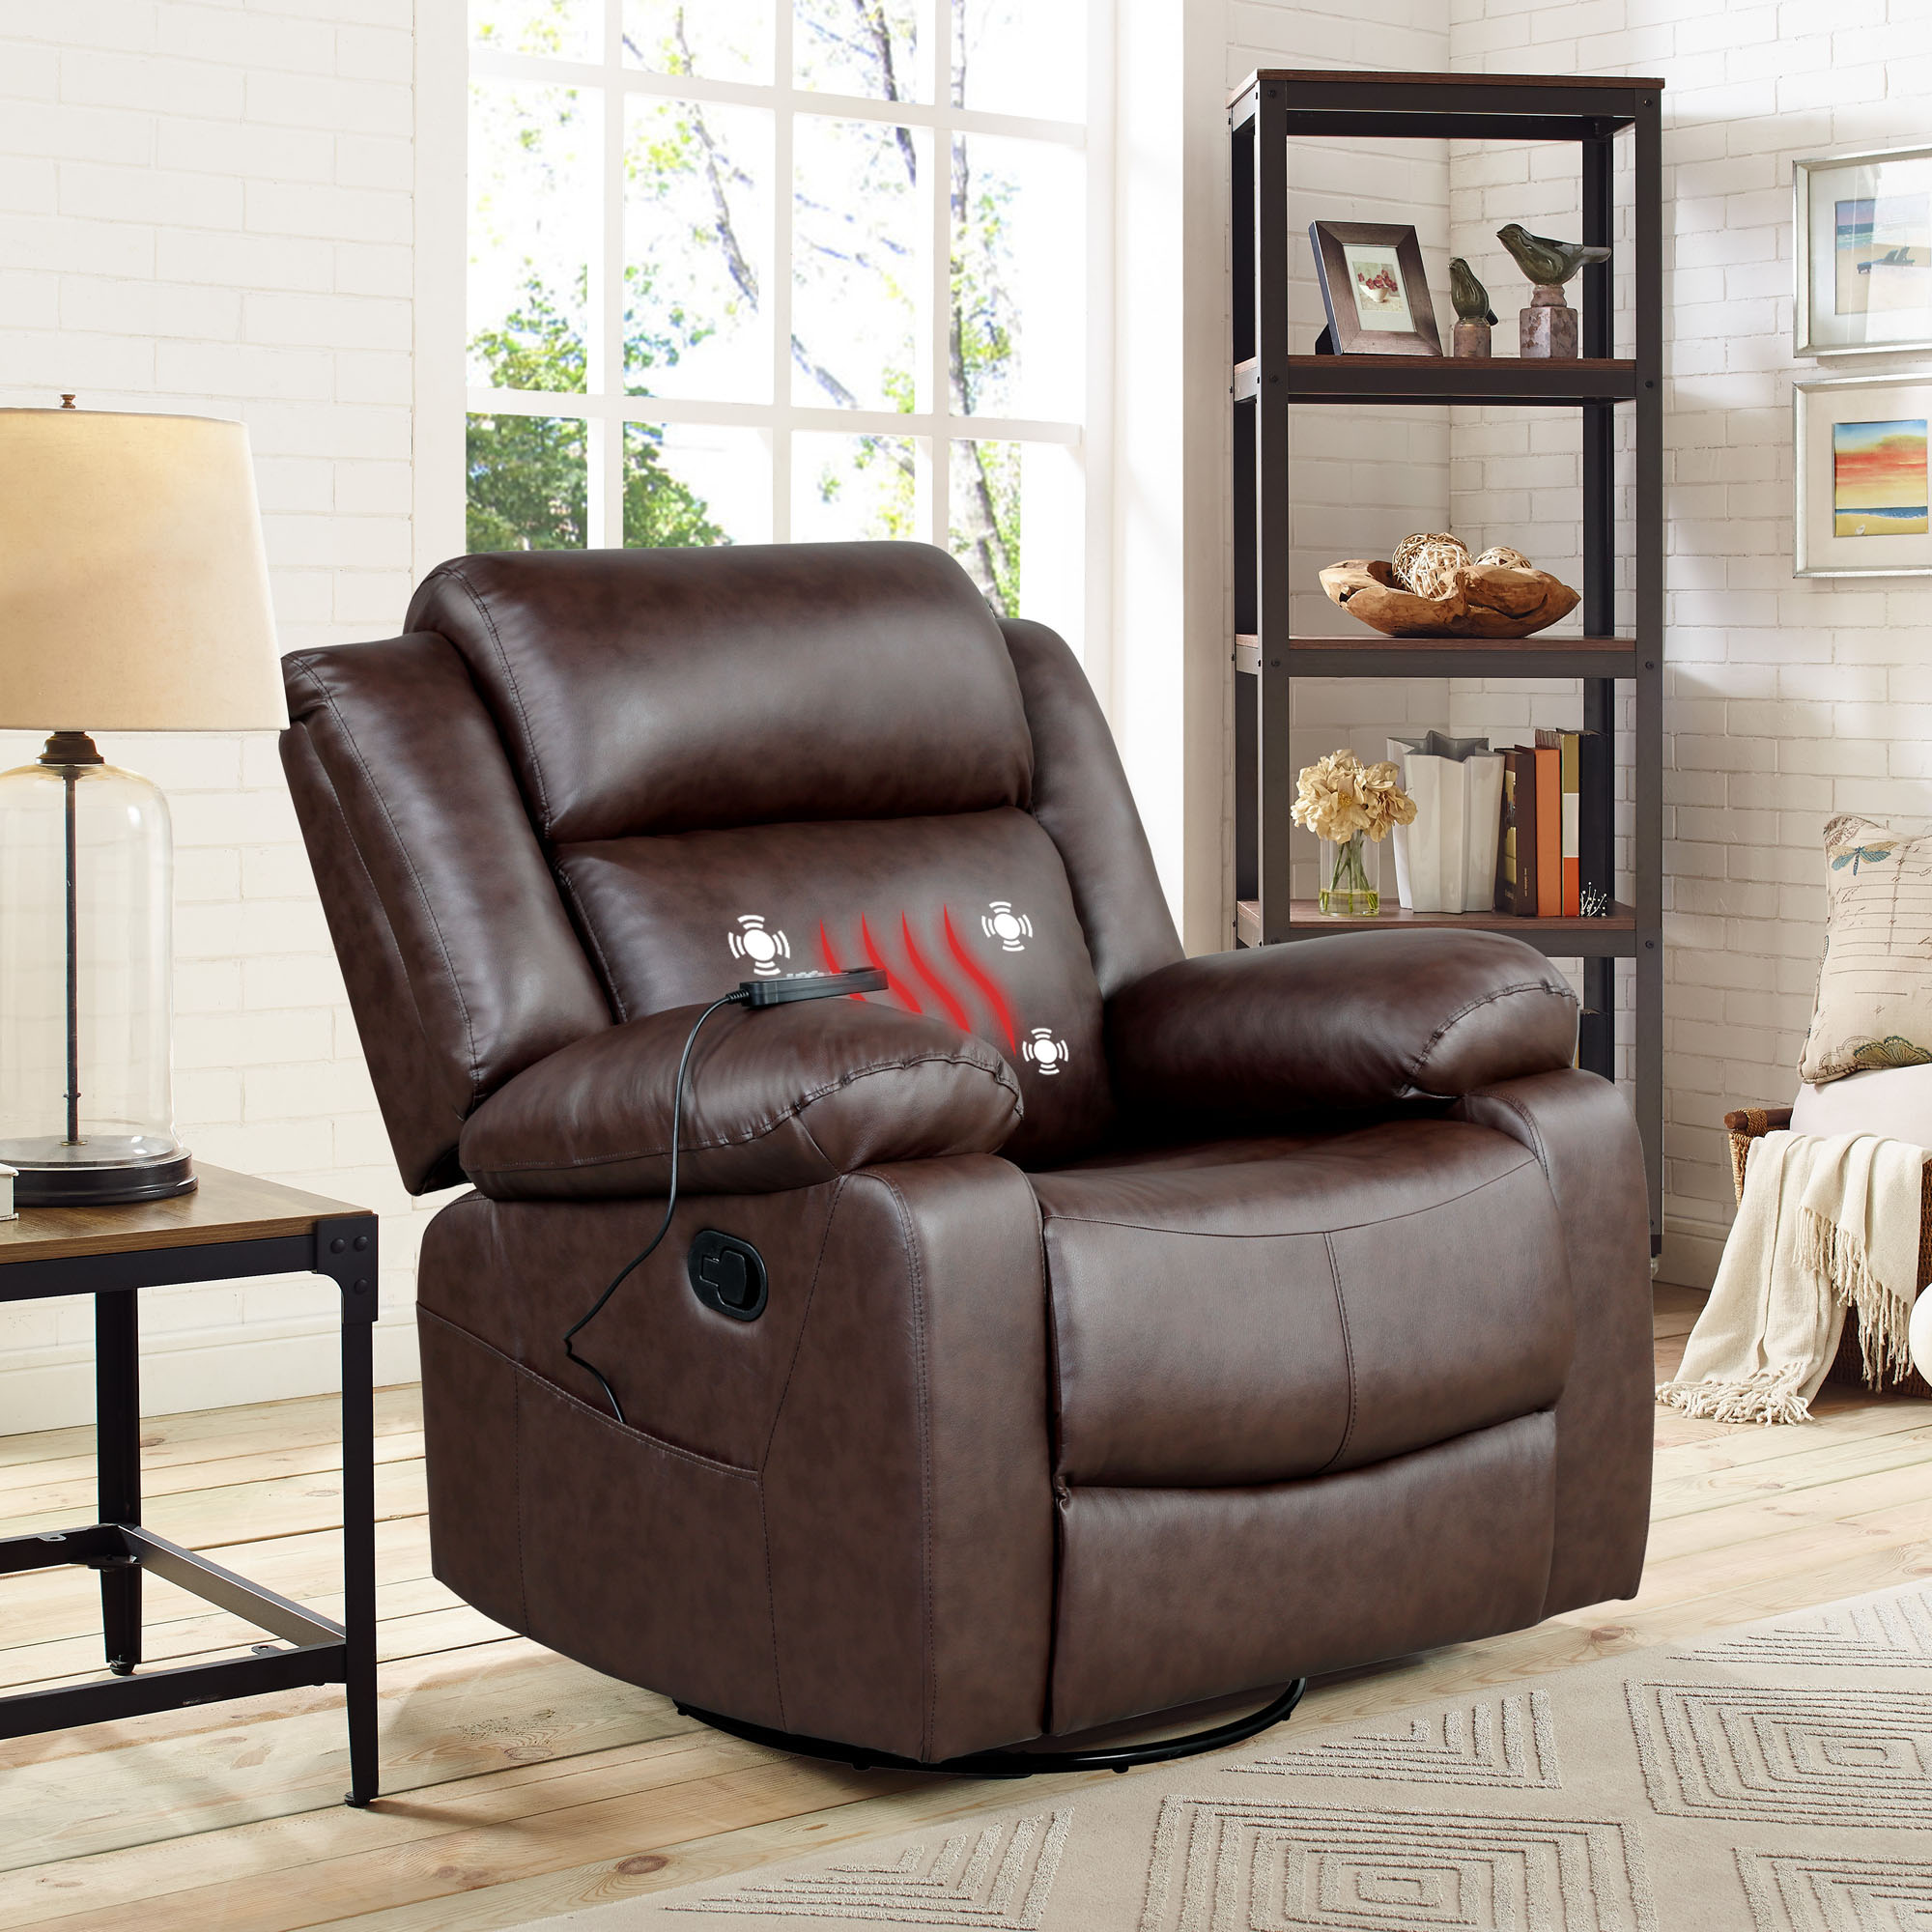 Elm & Oak Maxima Standard Manual Swivel Recliner with Massage and Heat, Brown Faux Leather - image 1 of 13